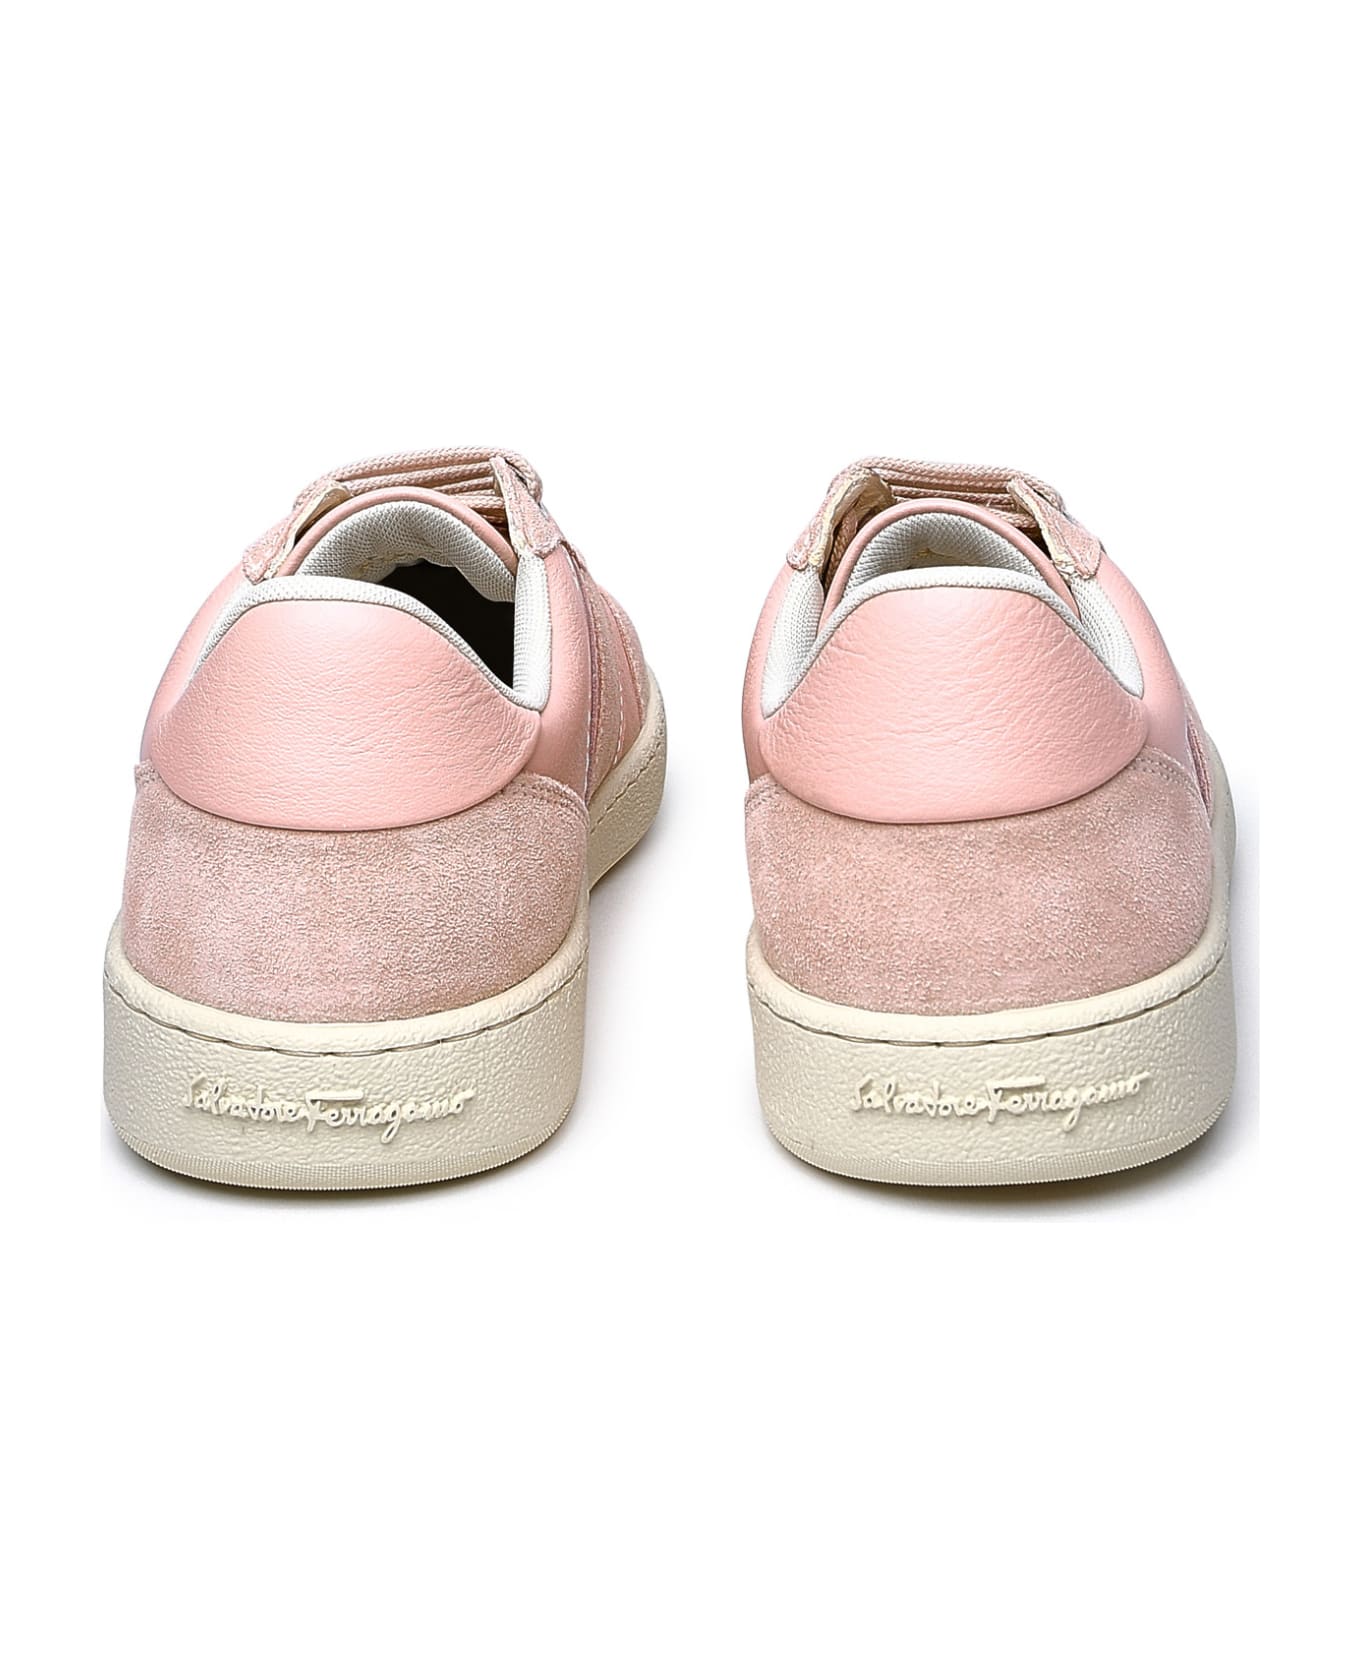 Ferragamo Pink Leather Sneakers - Pink